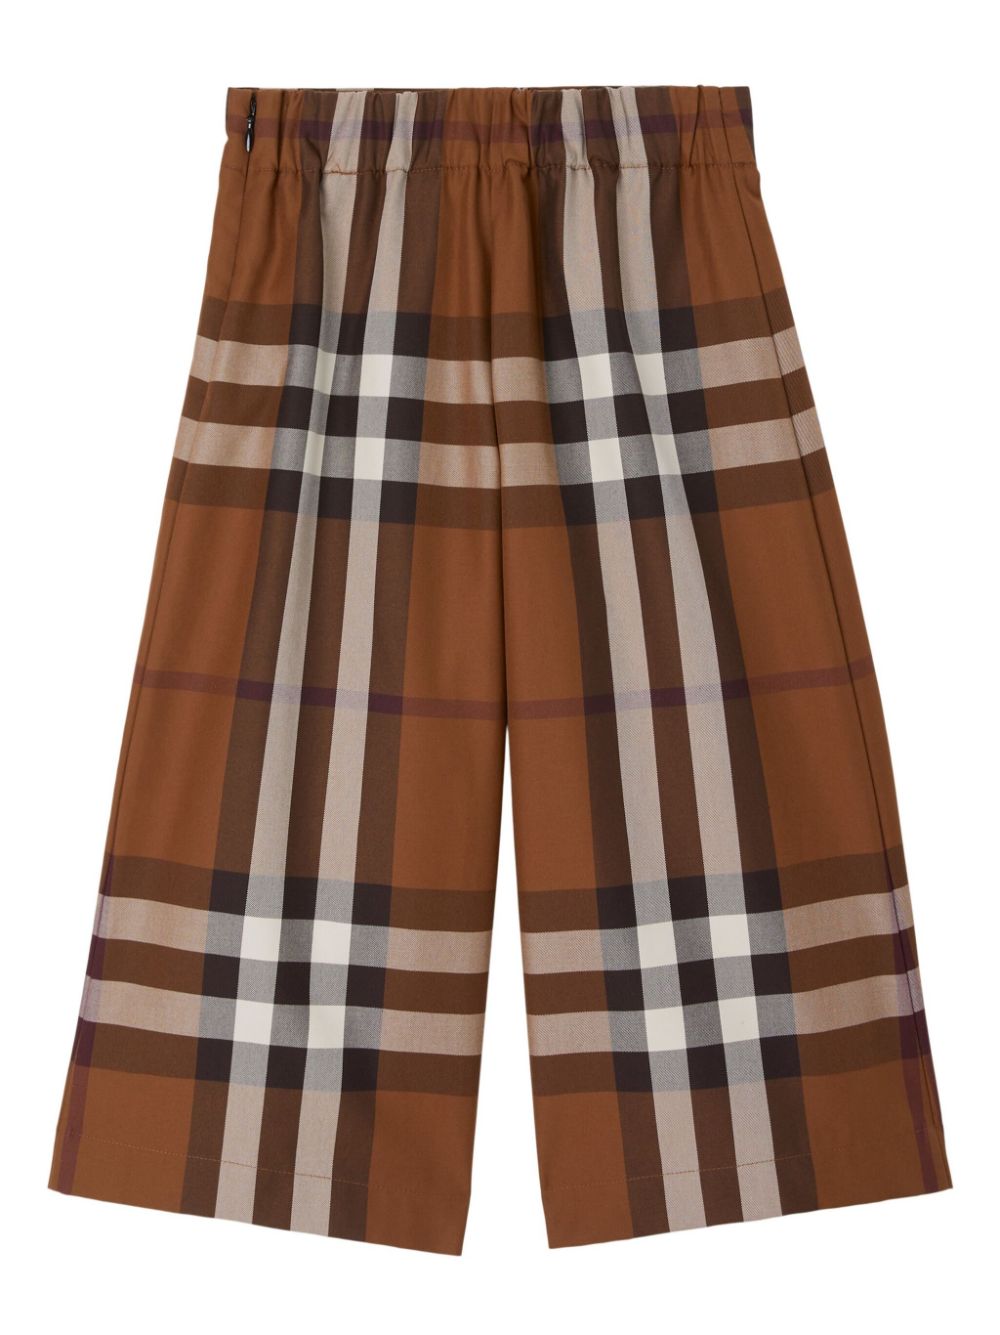 Chocolate brown trousers for girls